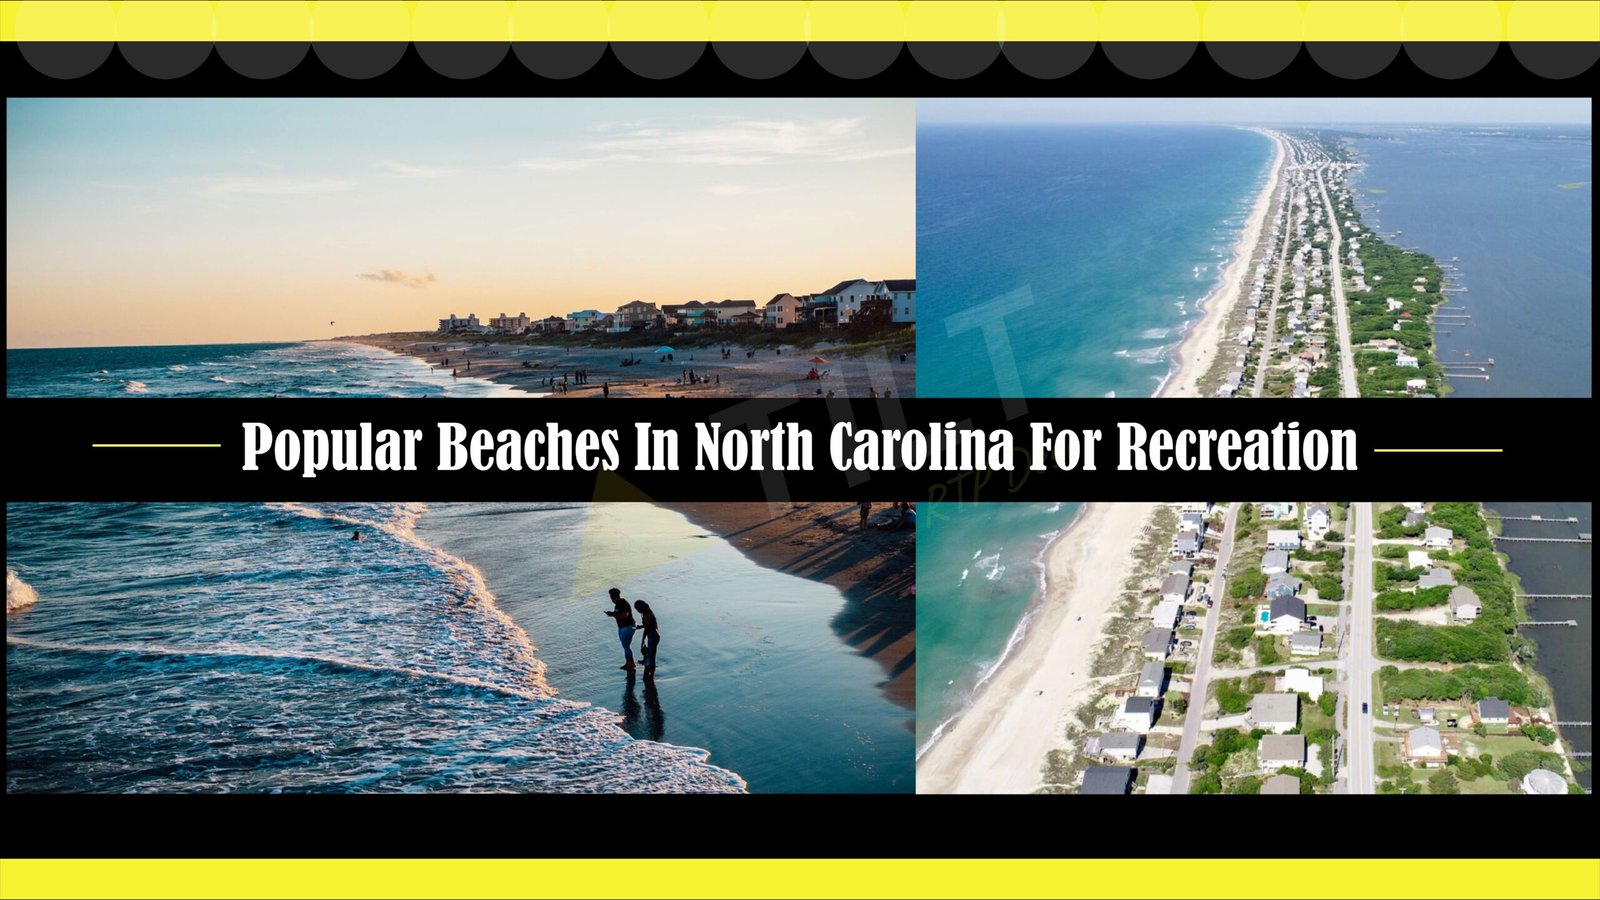 Popular Beaches In NC For Recreation